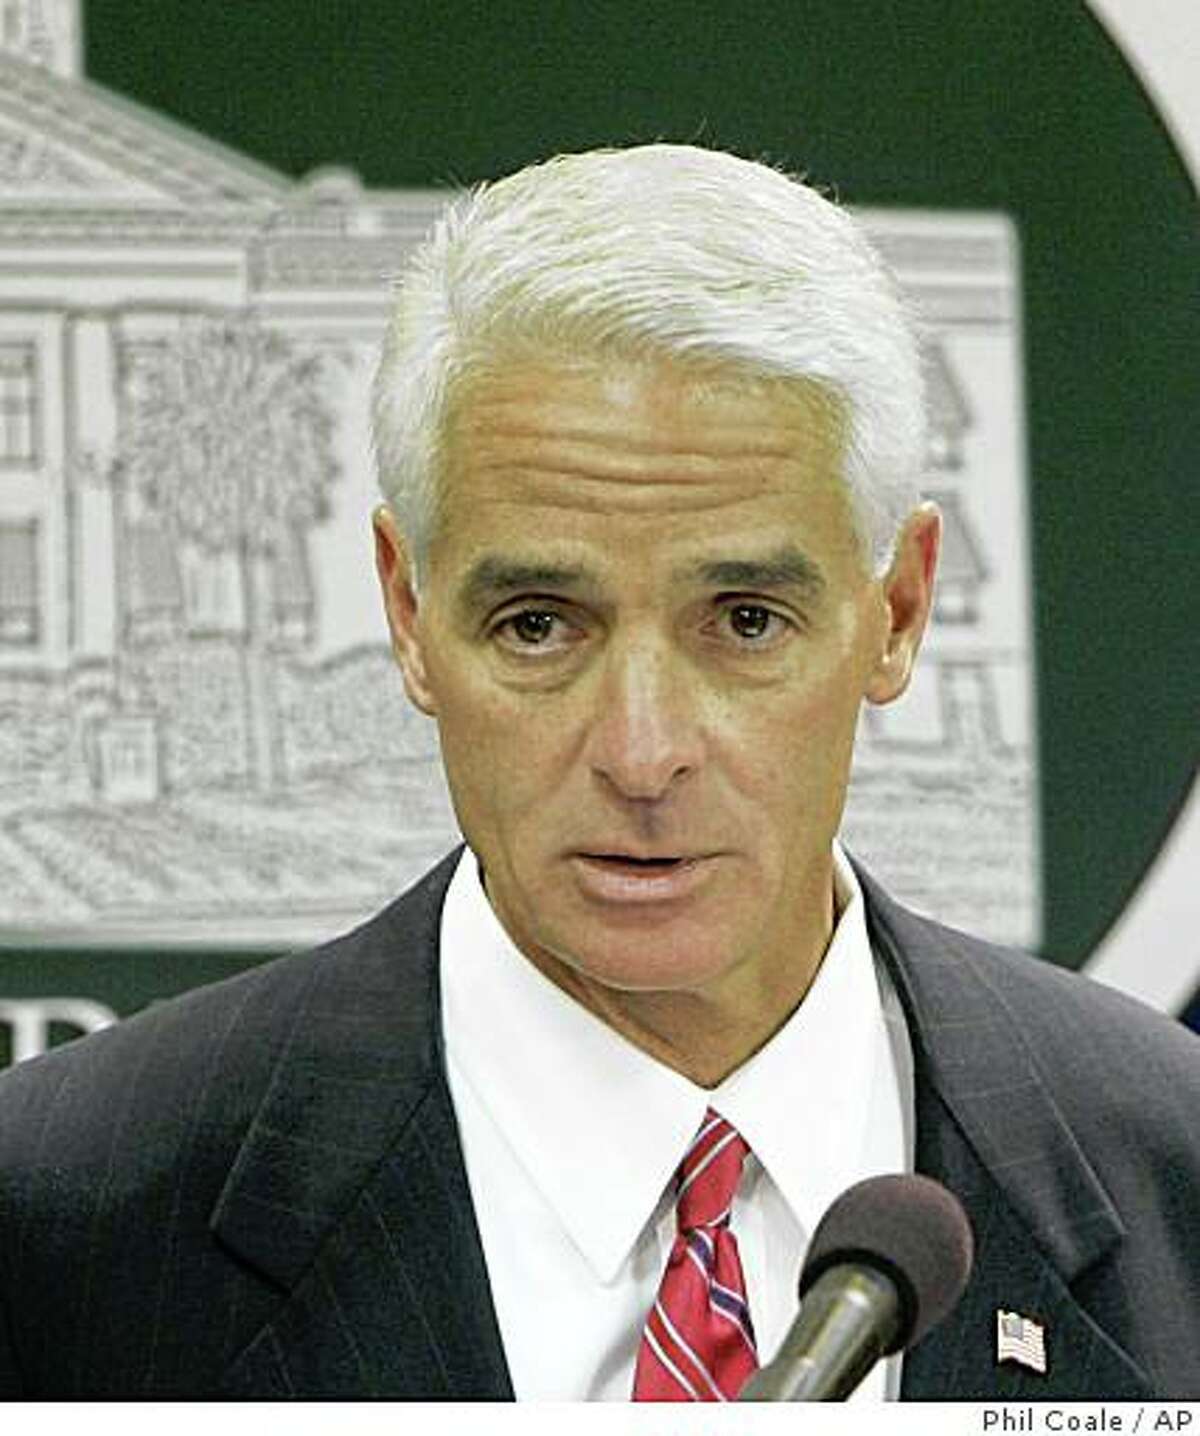 Gov. Charlie Crist announces at a news conference that he will run for the U. S. Senate and will not seek another term as Governor, Tuesday, May 12, 2009, in Tallahassee, Fla.(AP Photo/Phil Coale)